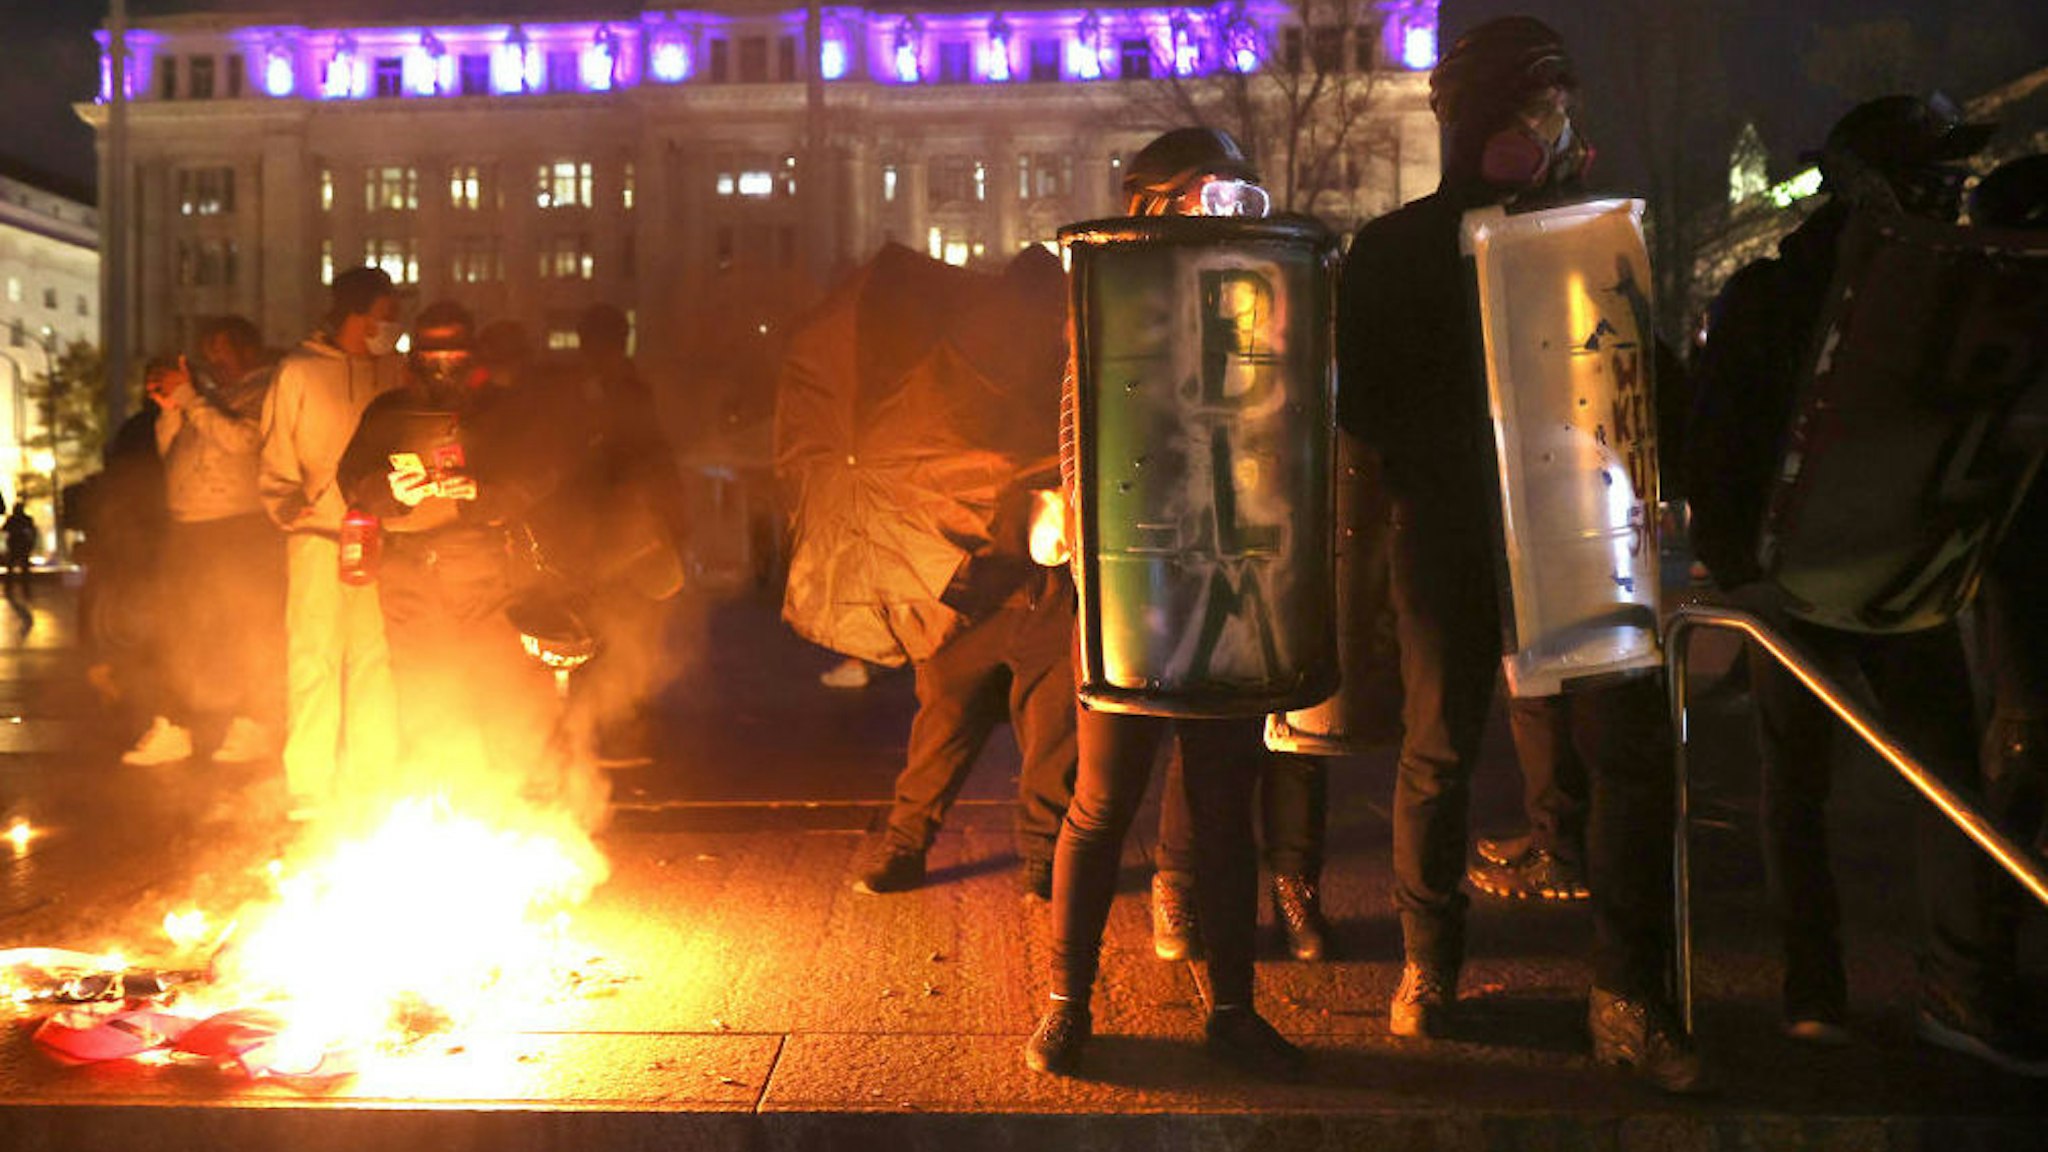 WASHINGTON, DC - NOVEMBER 14: Black Lives Matter protesters hold shields as they stand next to a small fire during a protest following the “Million MAGA March” from Freedom Plaza to the Supreme Court, on November 14, 2020 in Washington, DC. Supporters of U.S. President Donald Trump gathered to protest the outcome of the 2020 presidential election.